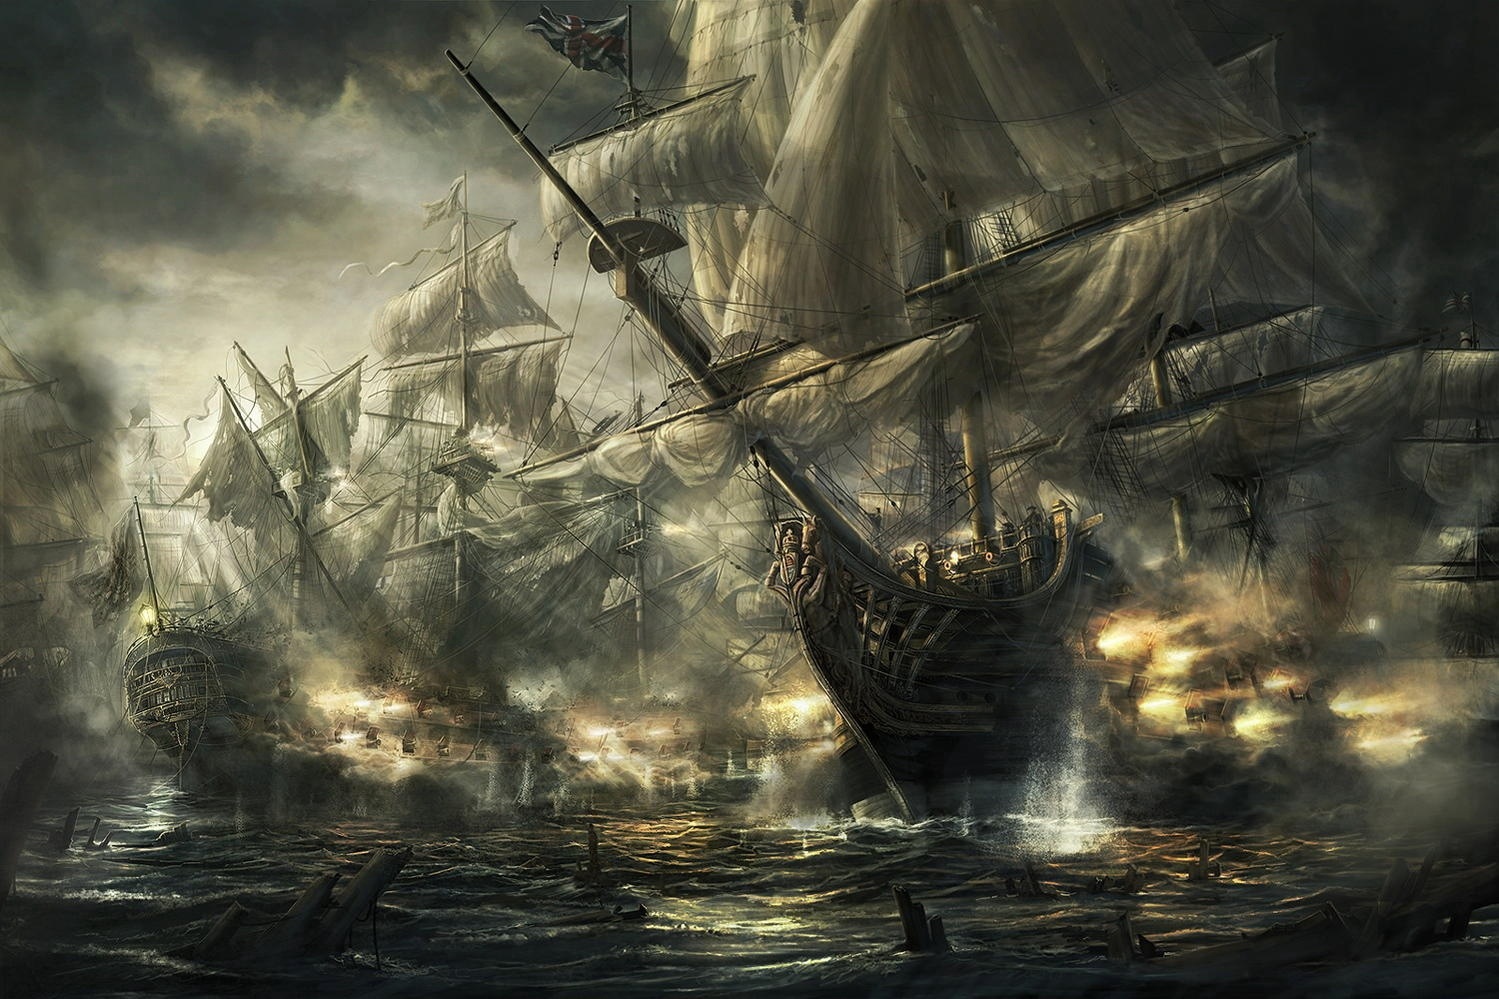 Ghost Pirate Ship Art Images Pictures   Becuo